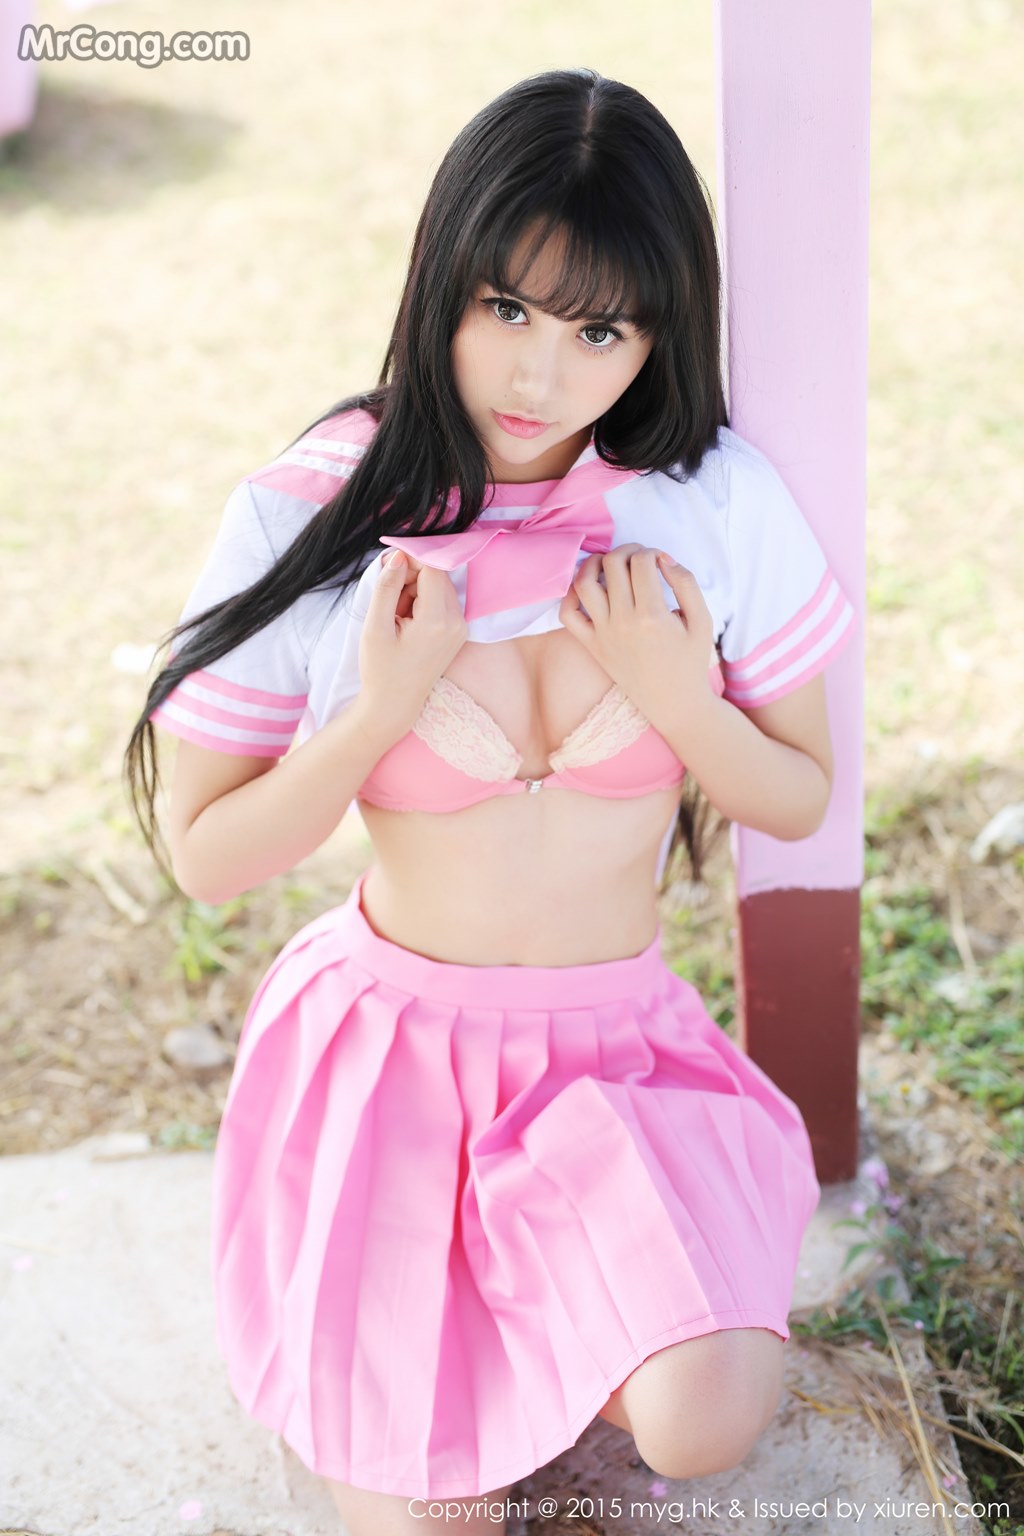 MyGirl Vol. 099: Model Yang Xiao Qing Er (杨晓青 儿) (62 pictures) photo 1-4